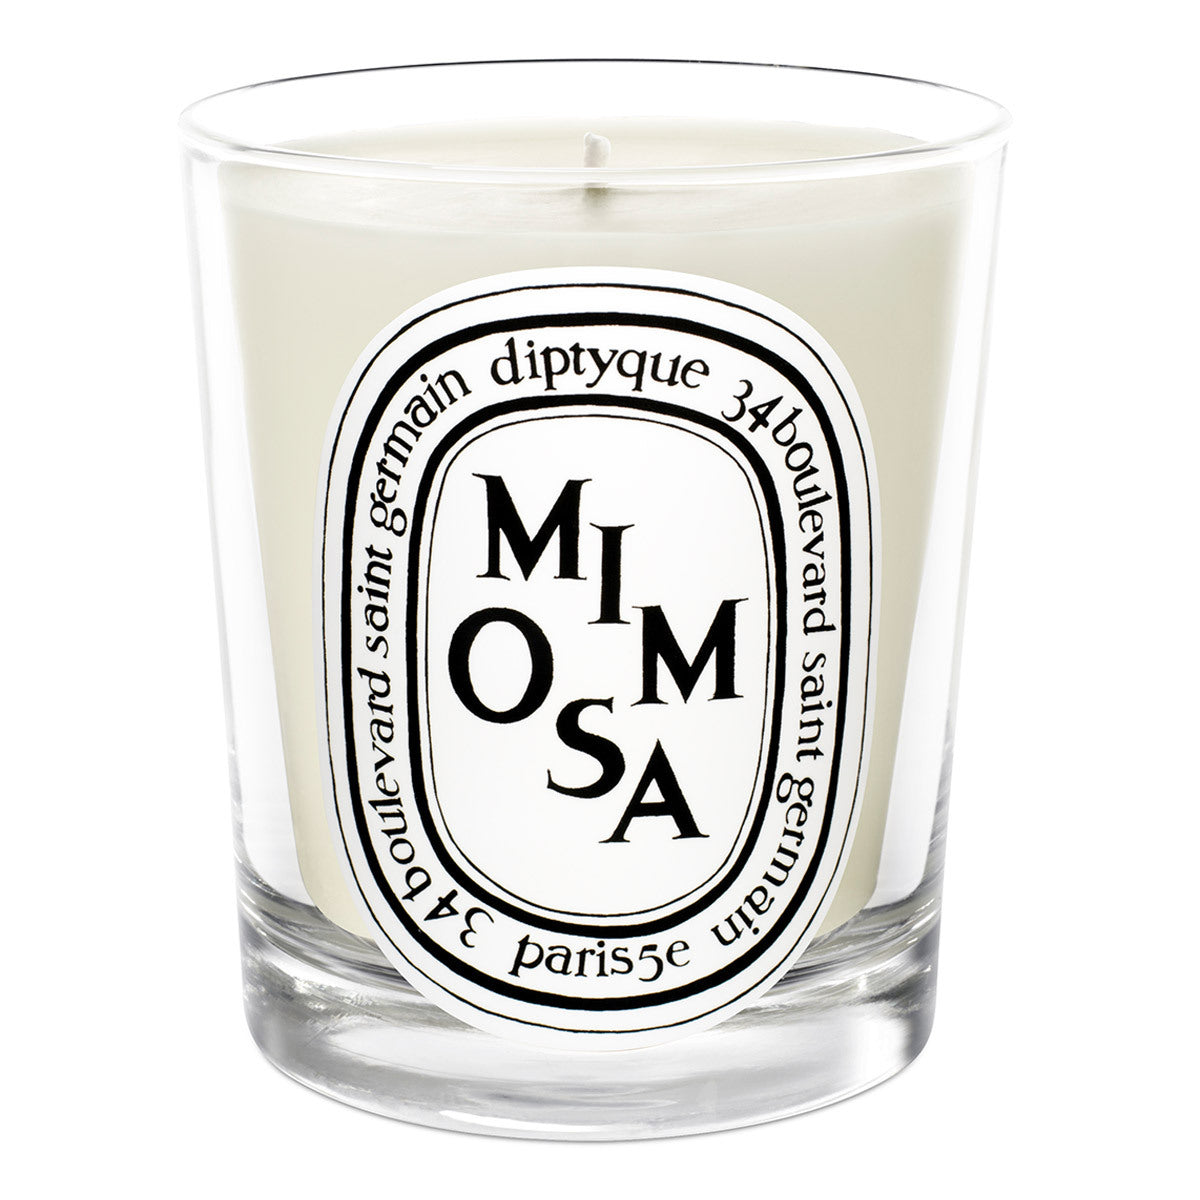 Primary image of Mimosa Candle